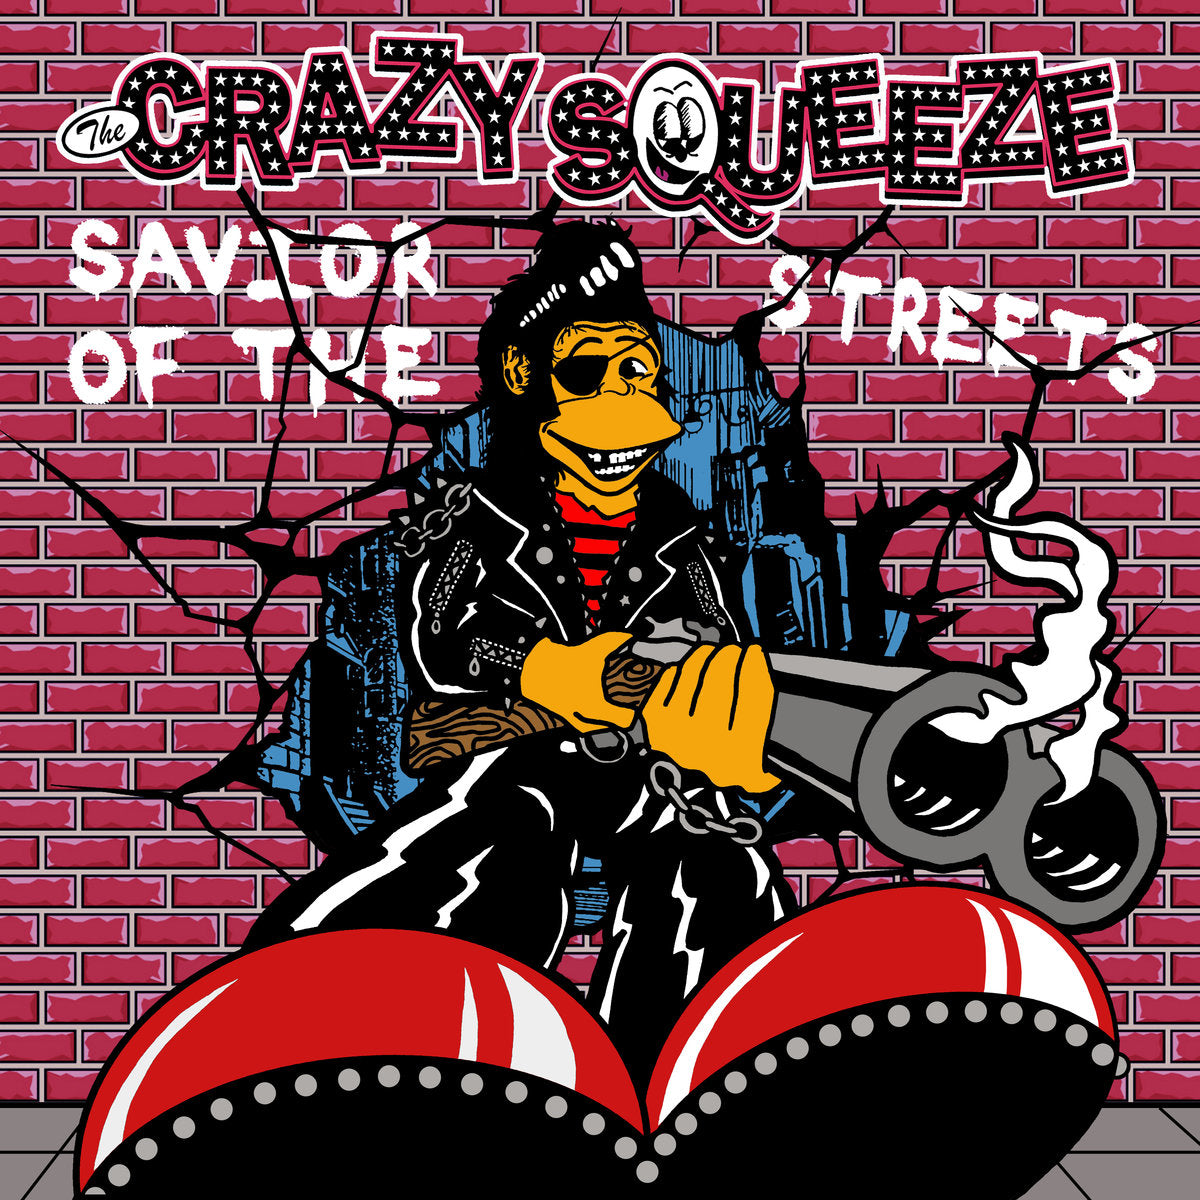 Crazy Squeeze- Savior Of The Streets LP ~RARE CLEAR AND RED SPLAT WAX LTD TO 100!